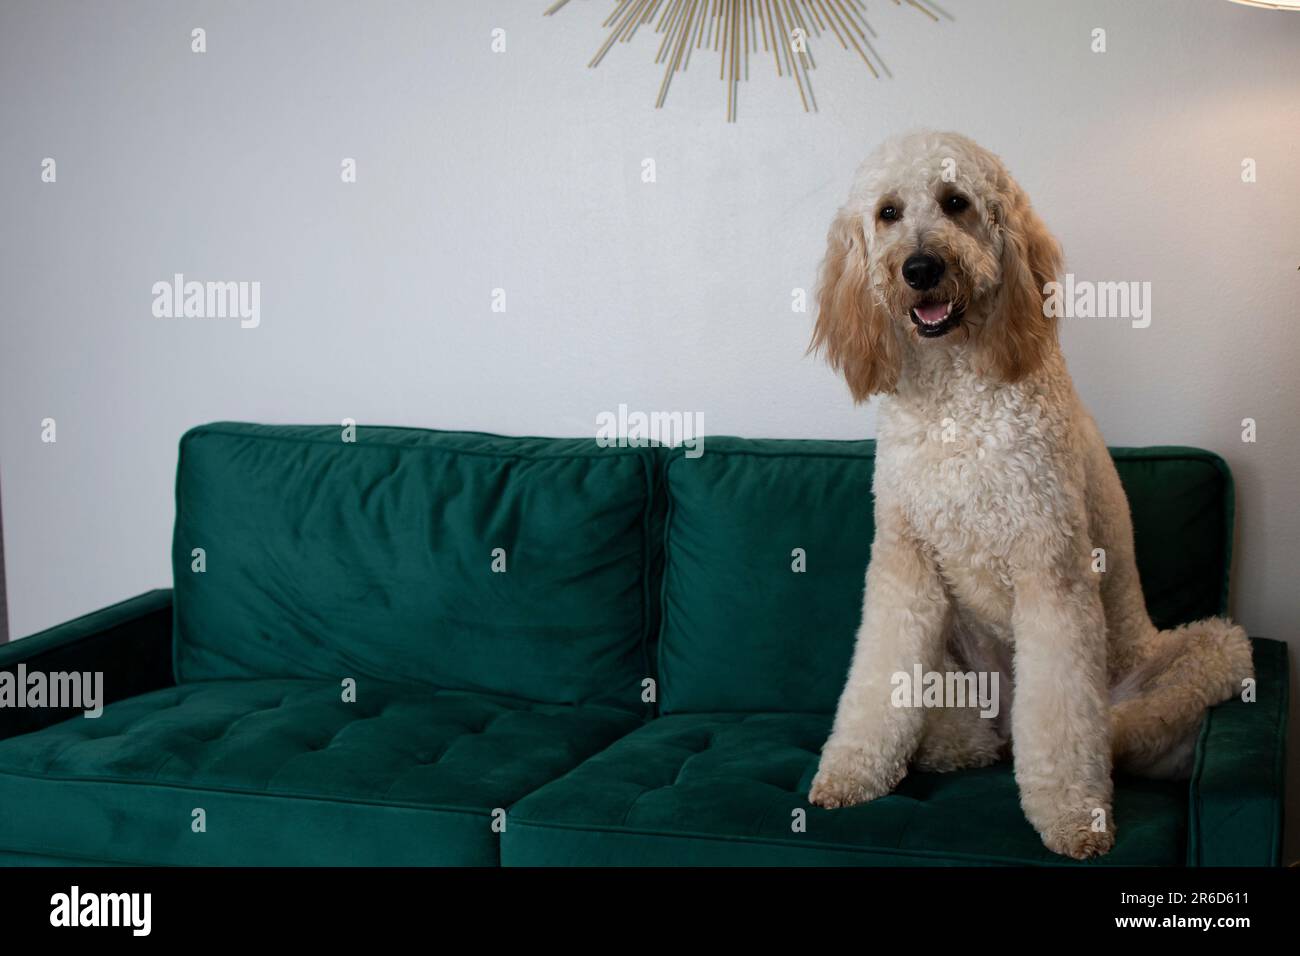 Portrait of a Huge white dog Goldendoodle sitting on a green velvet couch Stock Photo